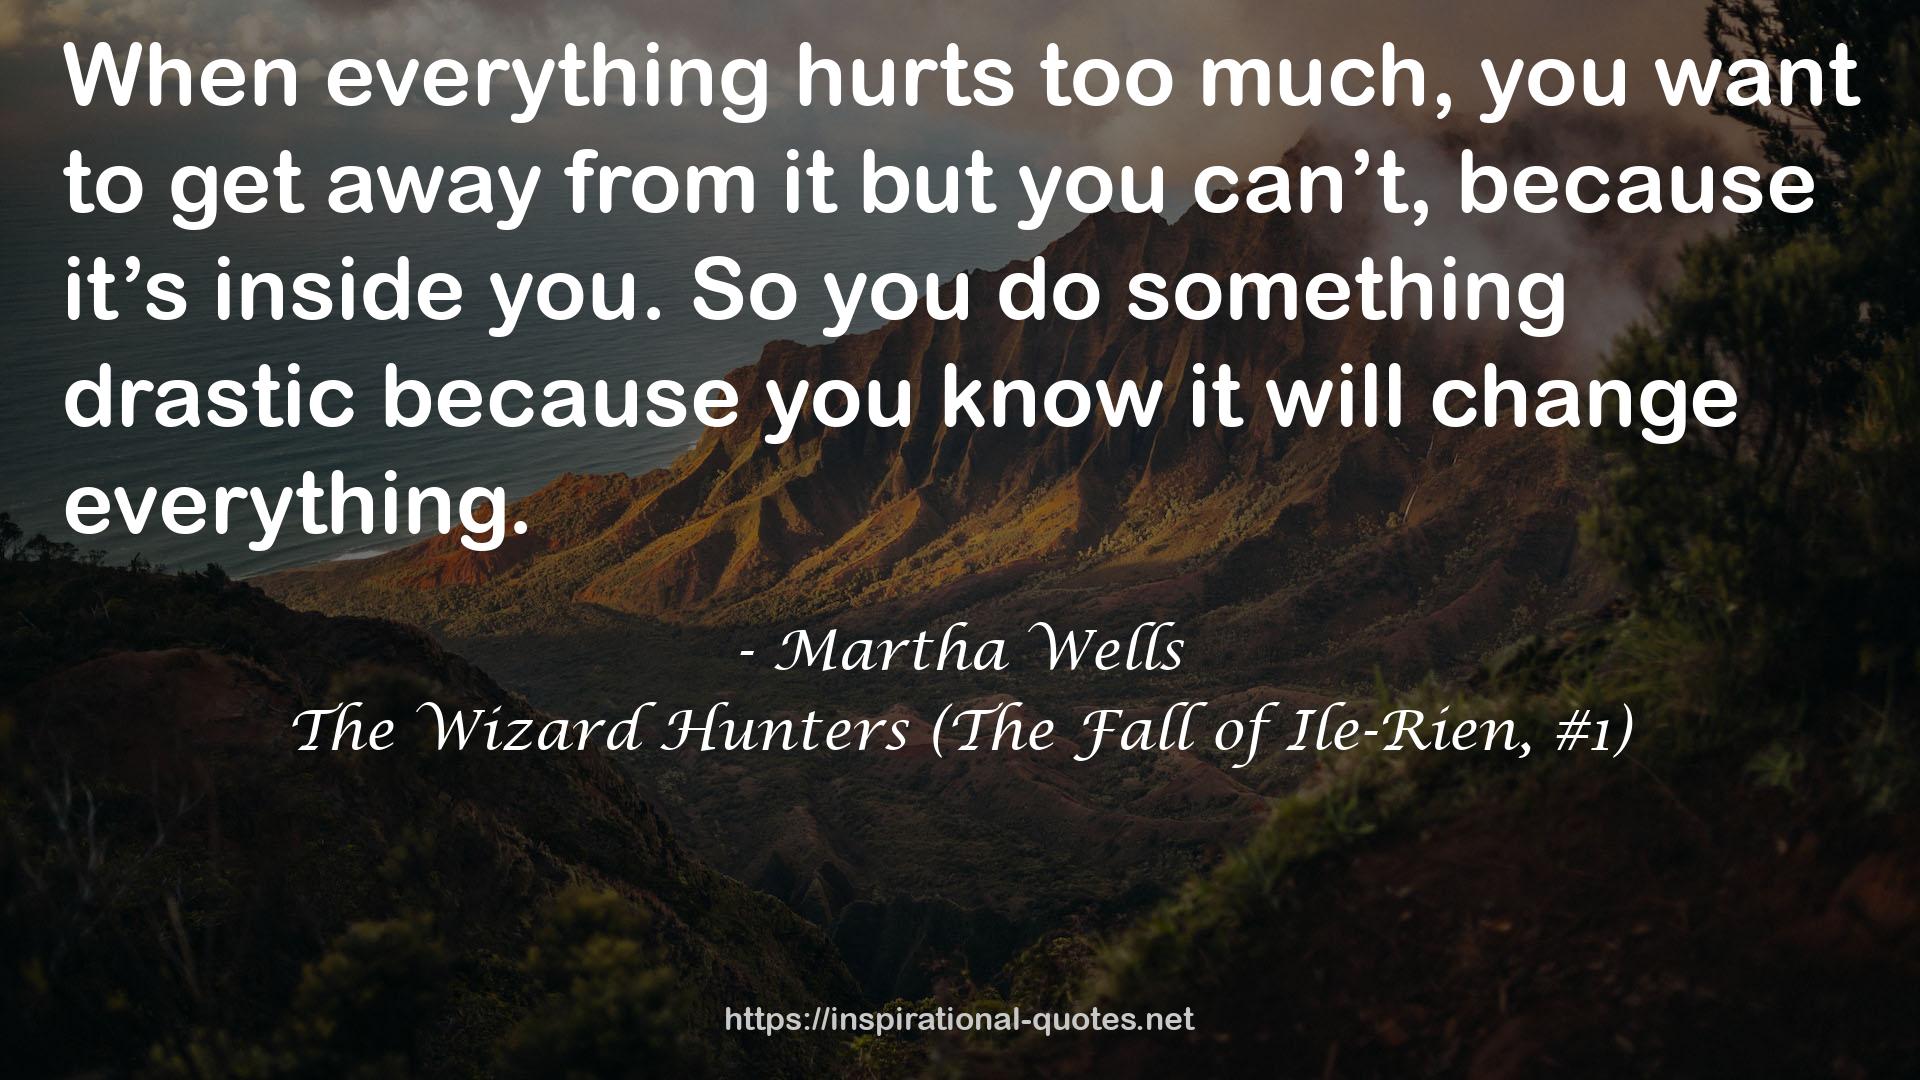 The Wizard Hunters (The Fall of Ile-Rien, #1) QUOTES